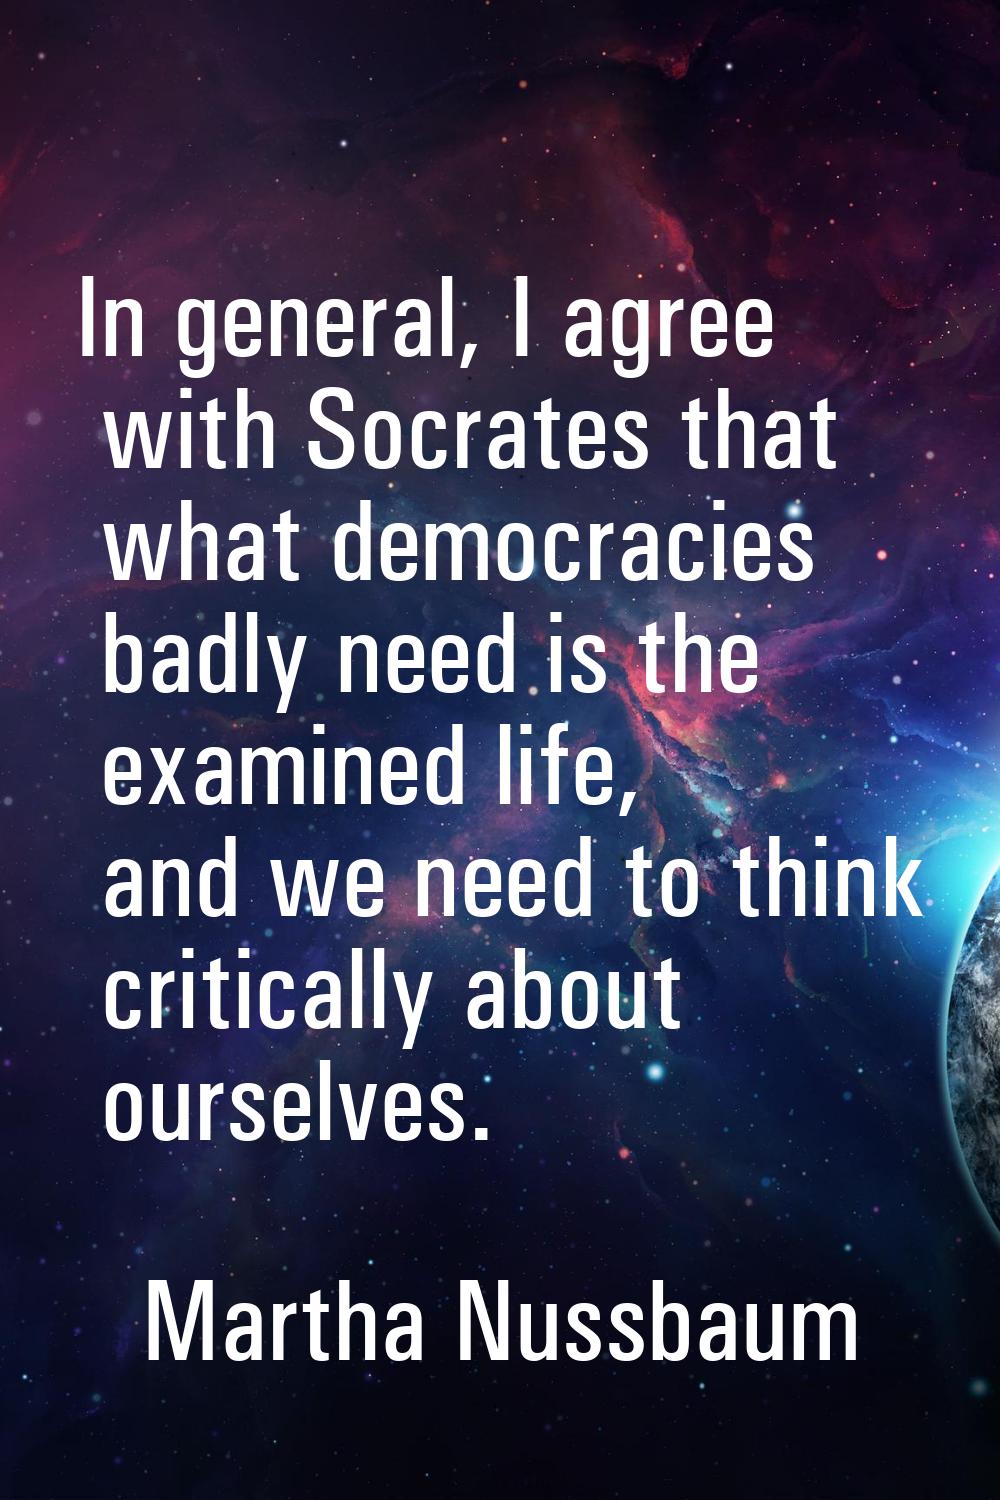 In general, I agree with Socrates that what democracies badly need is the examined life, and we nee